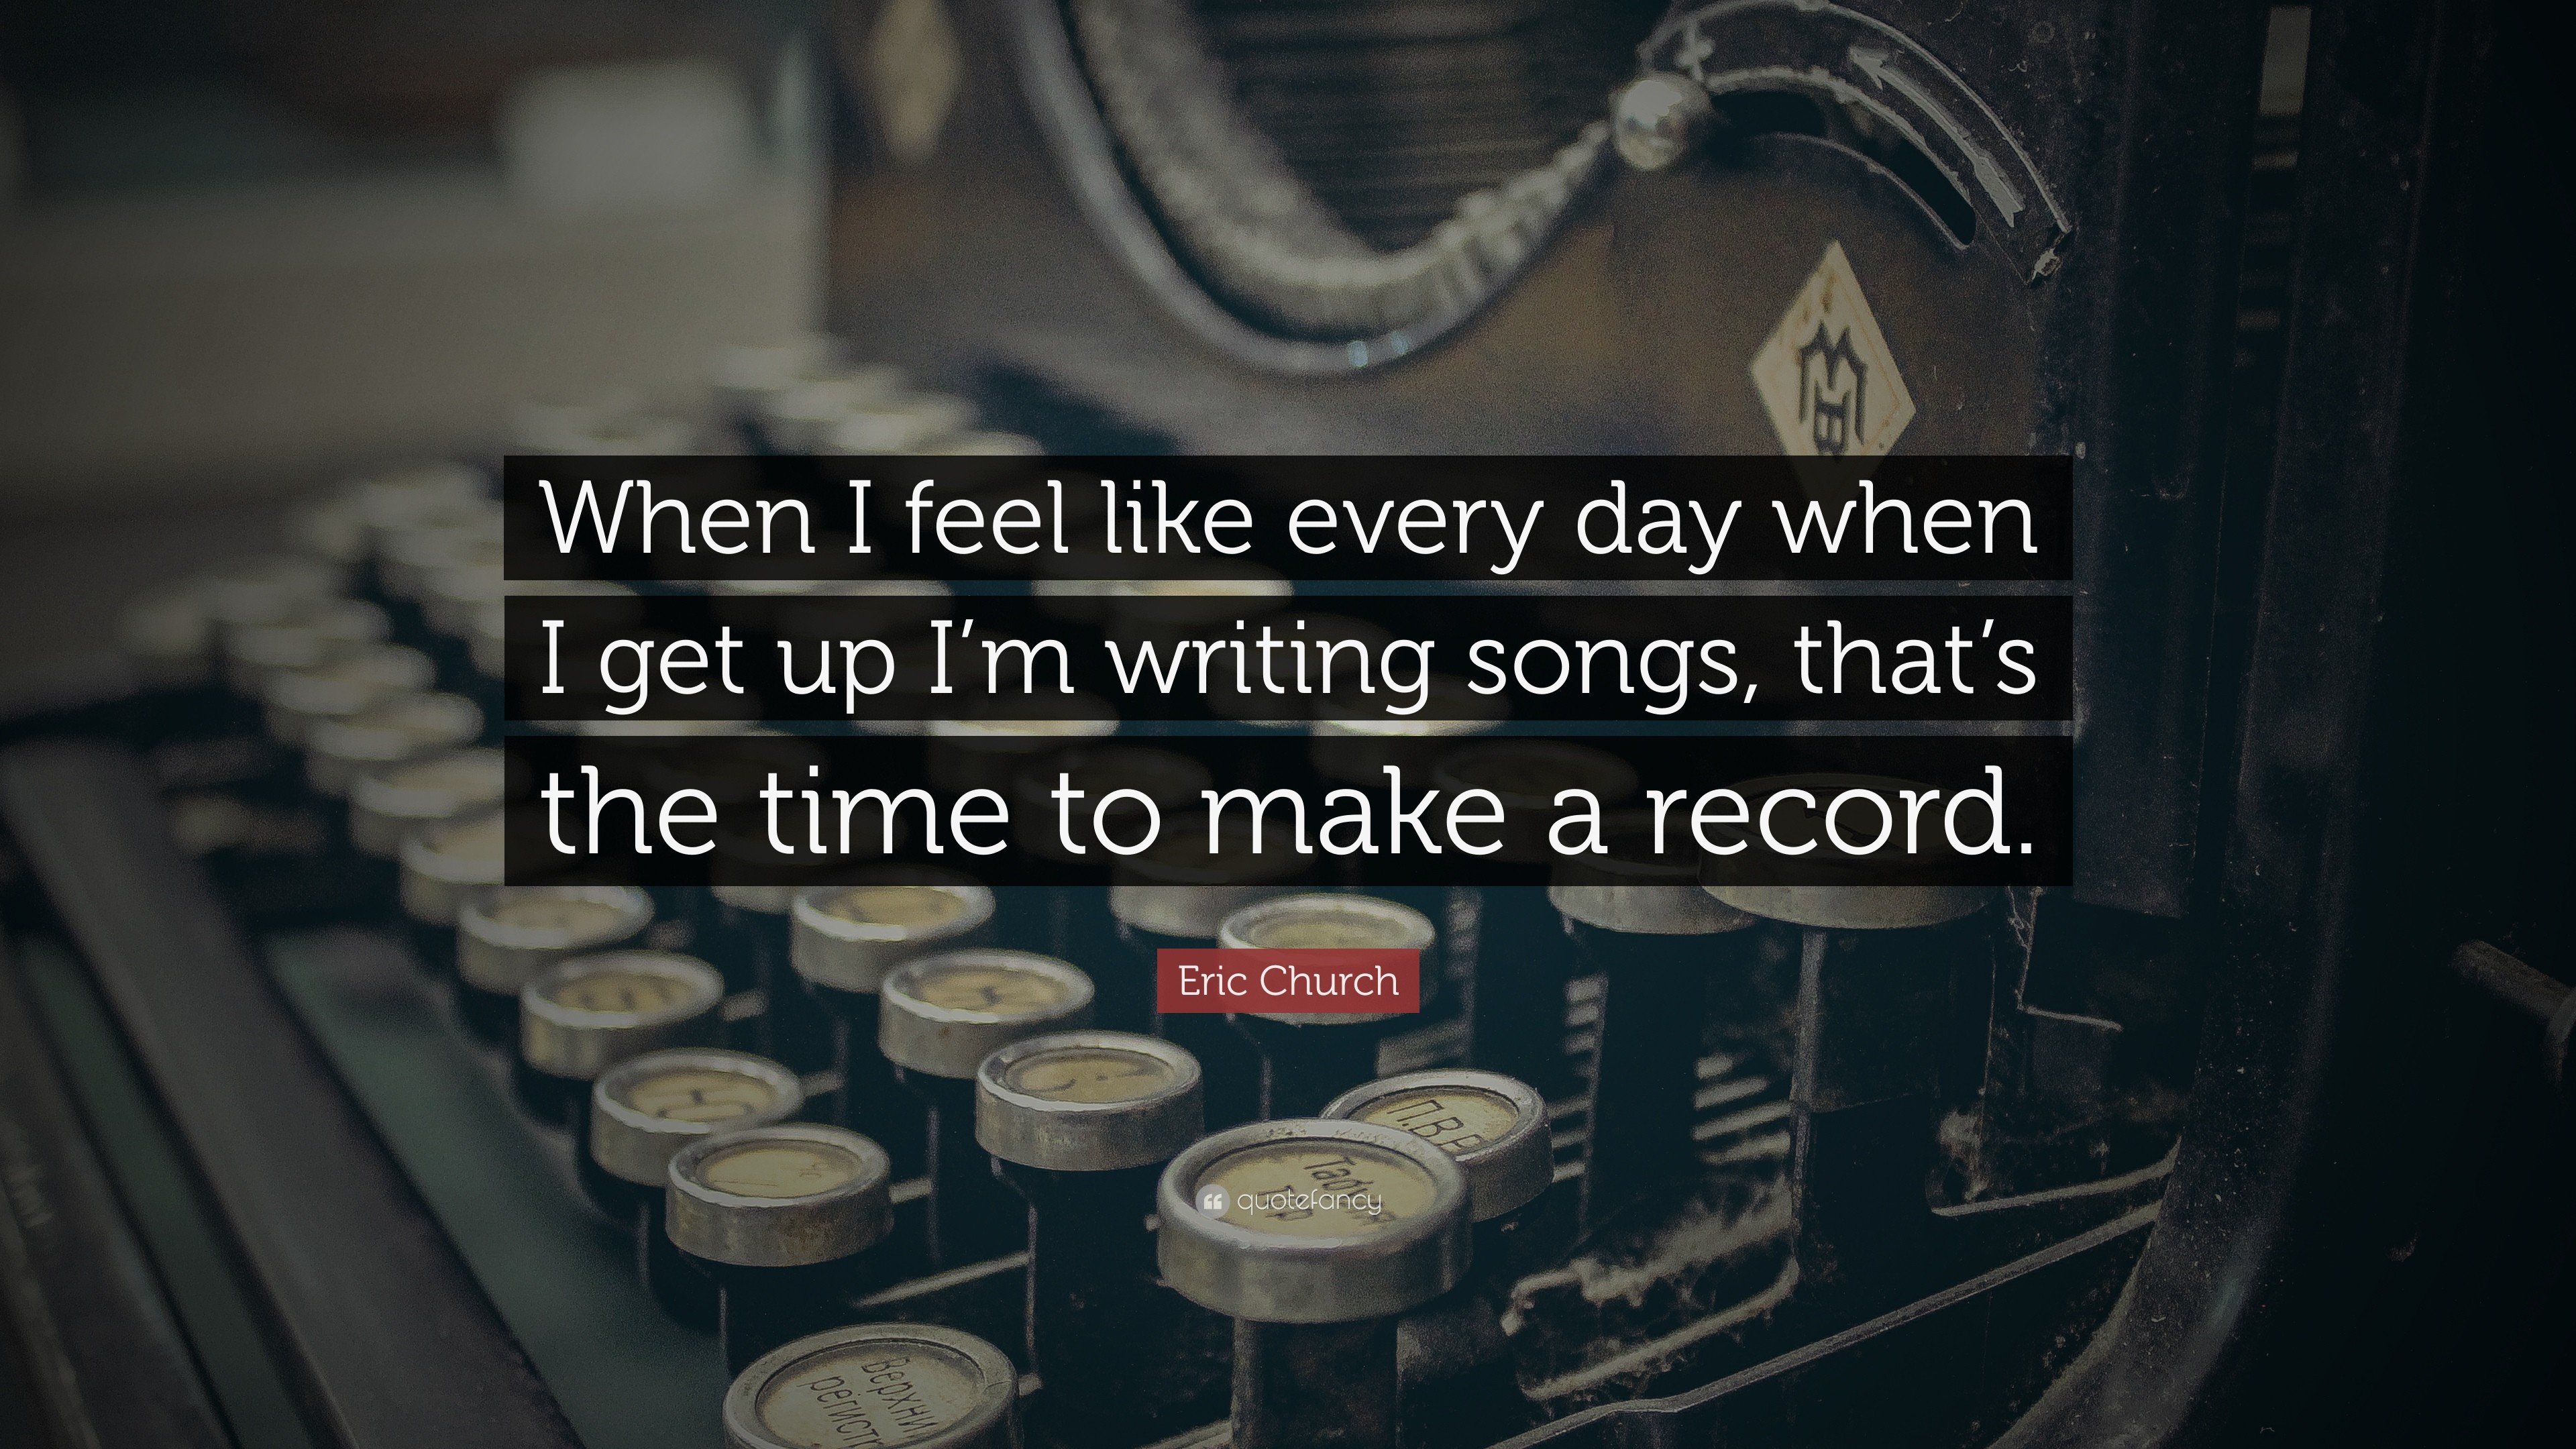 3840x2160 Eric Church Quote: “When I feel like every day when I get up I